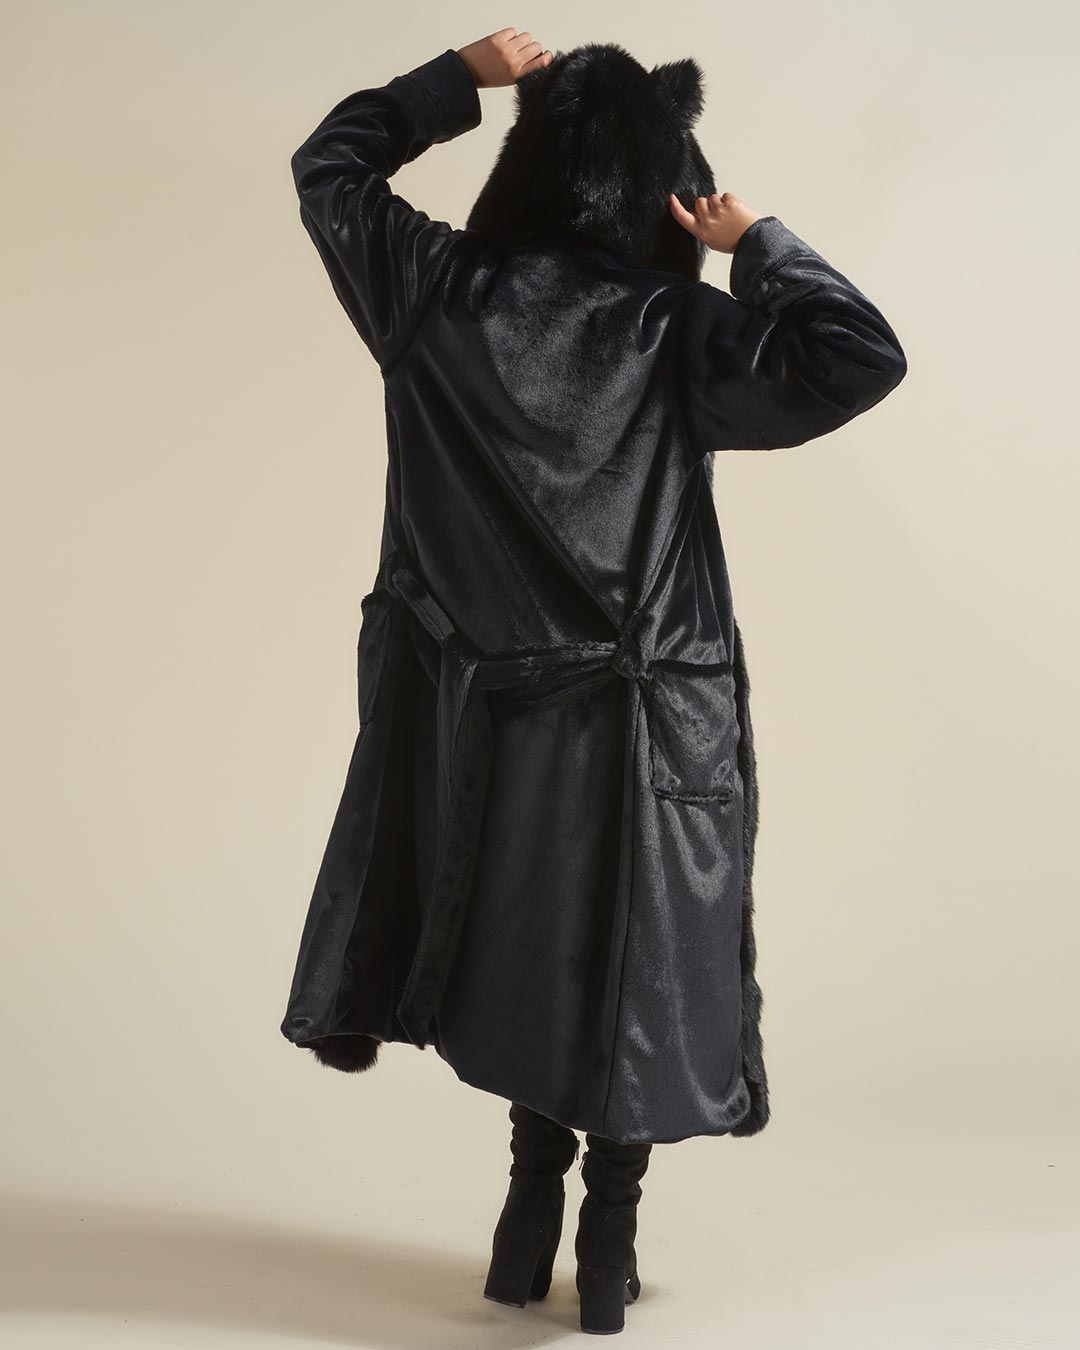 Back View of Black Panther Classic Faux Fur Style Robe on Female Model